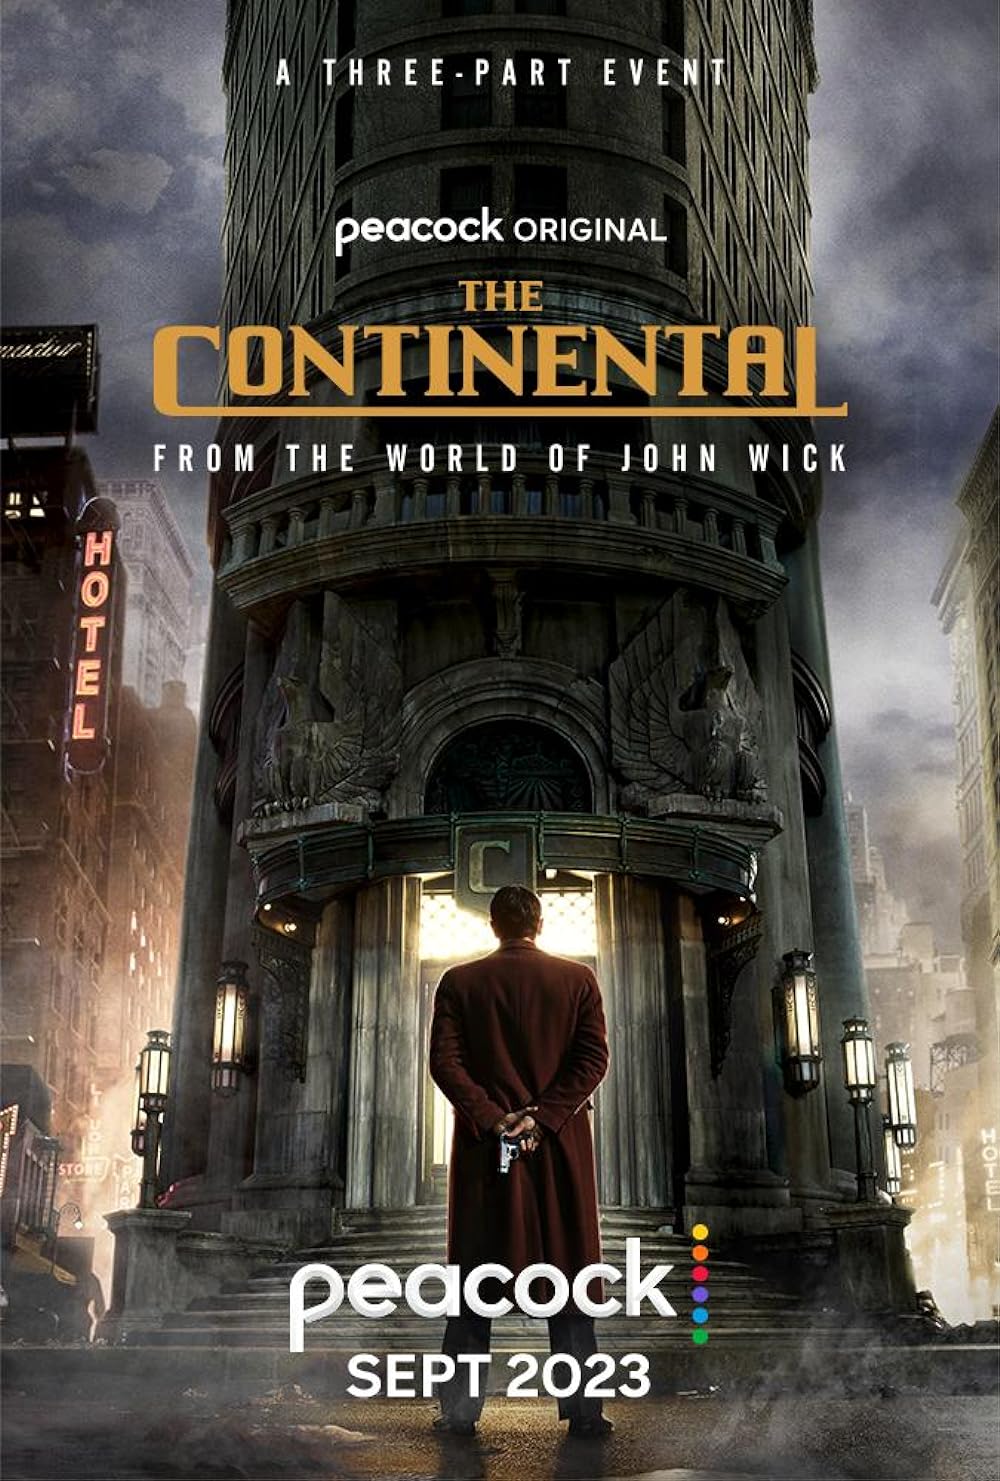 His ultimate goal is to rise through the ranks and assume the role of manager at The Continental, a sanctuary for legal assassins. Fans of the John Wick series will appreciate this deeper dive into the enigmatic world of assassins, with 